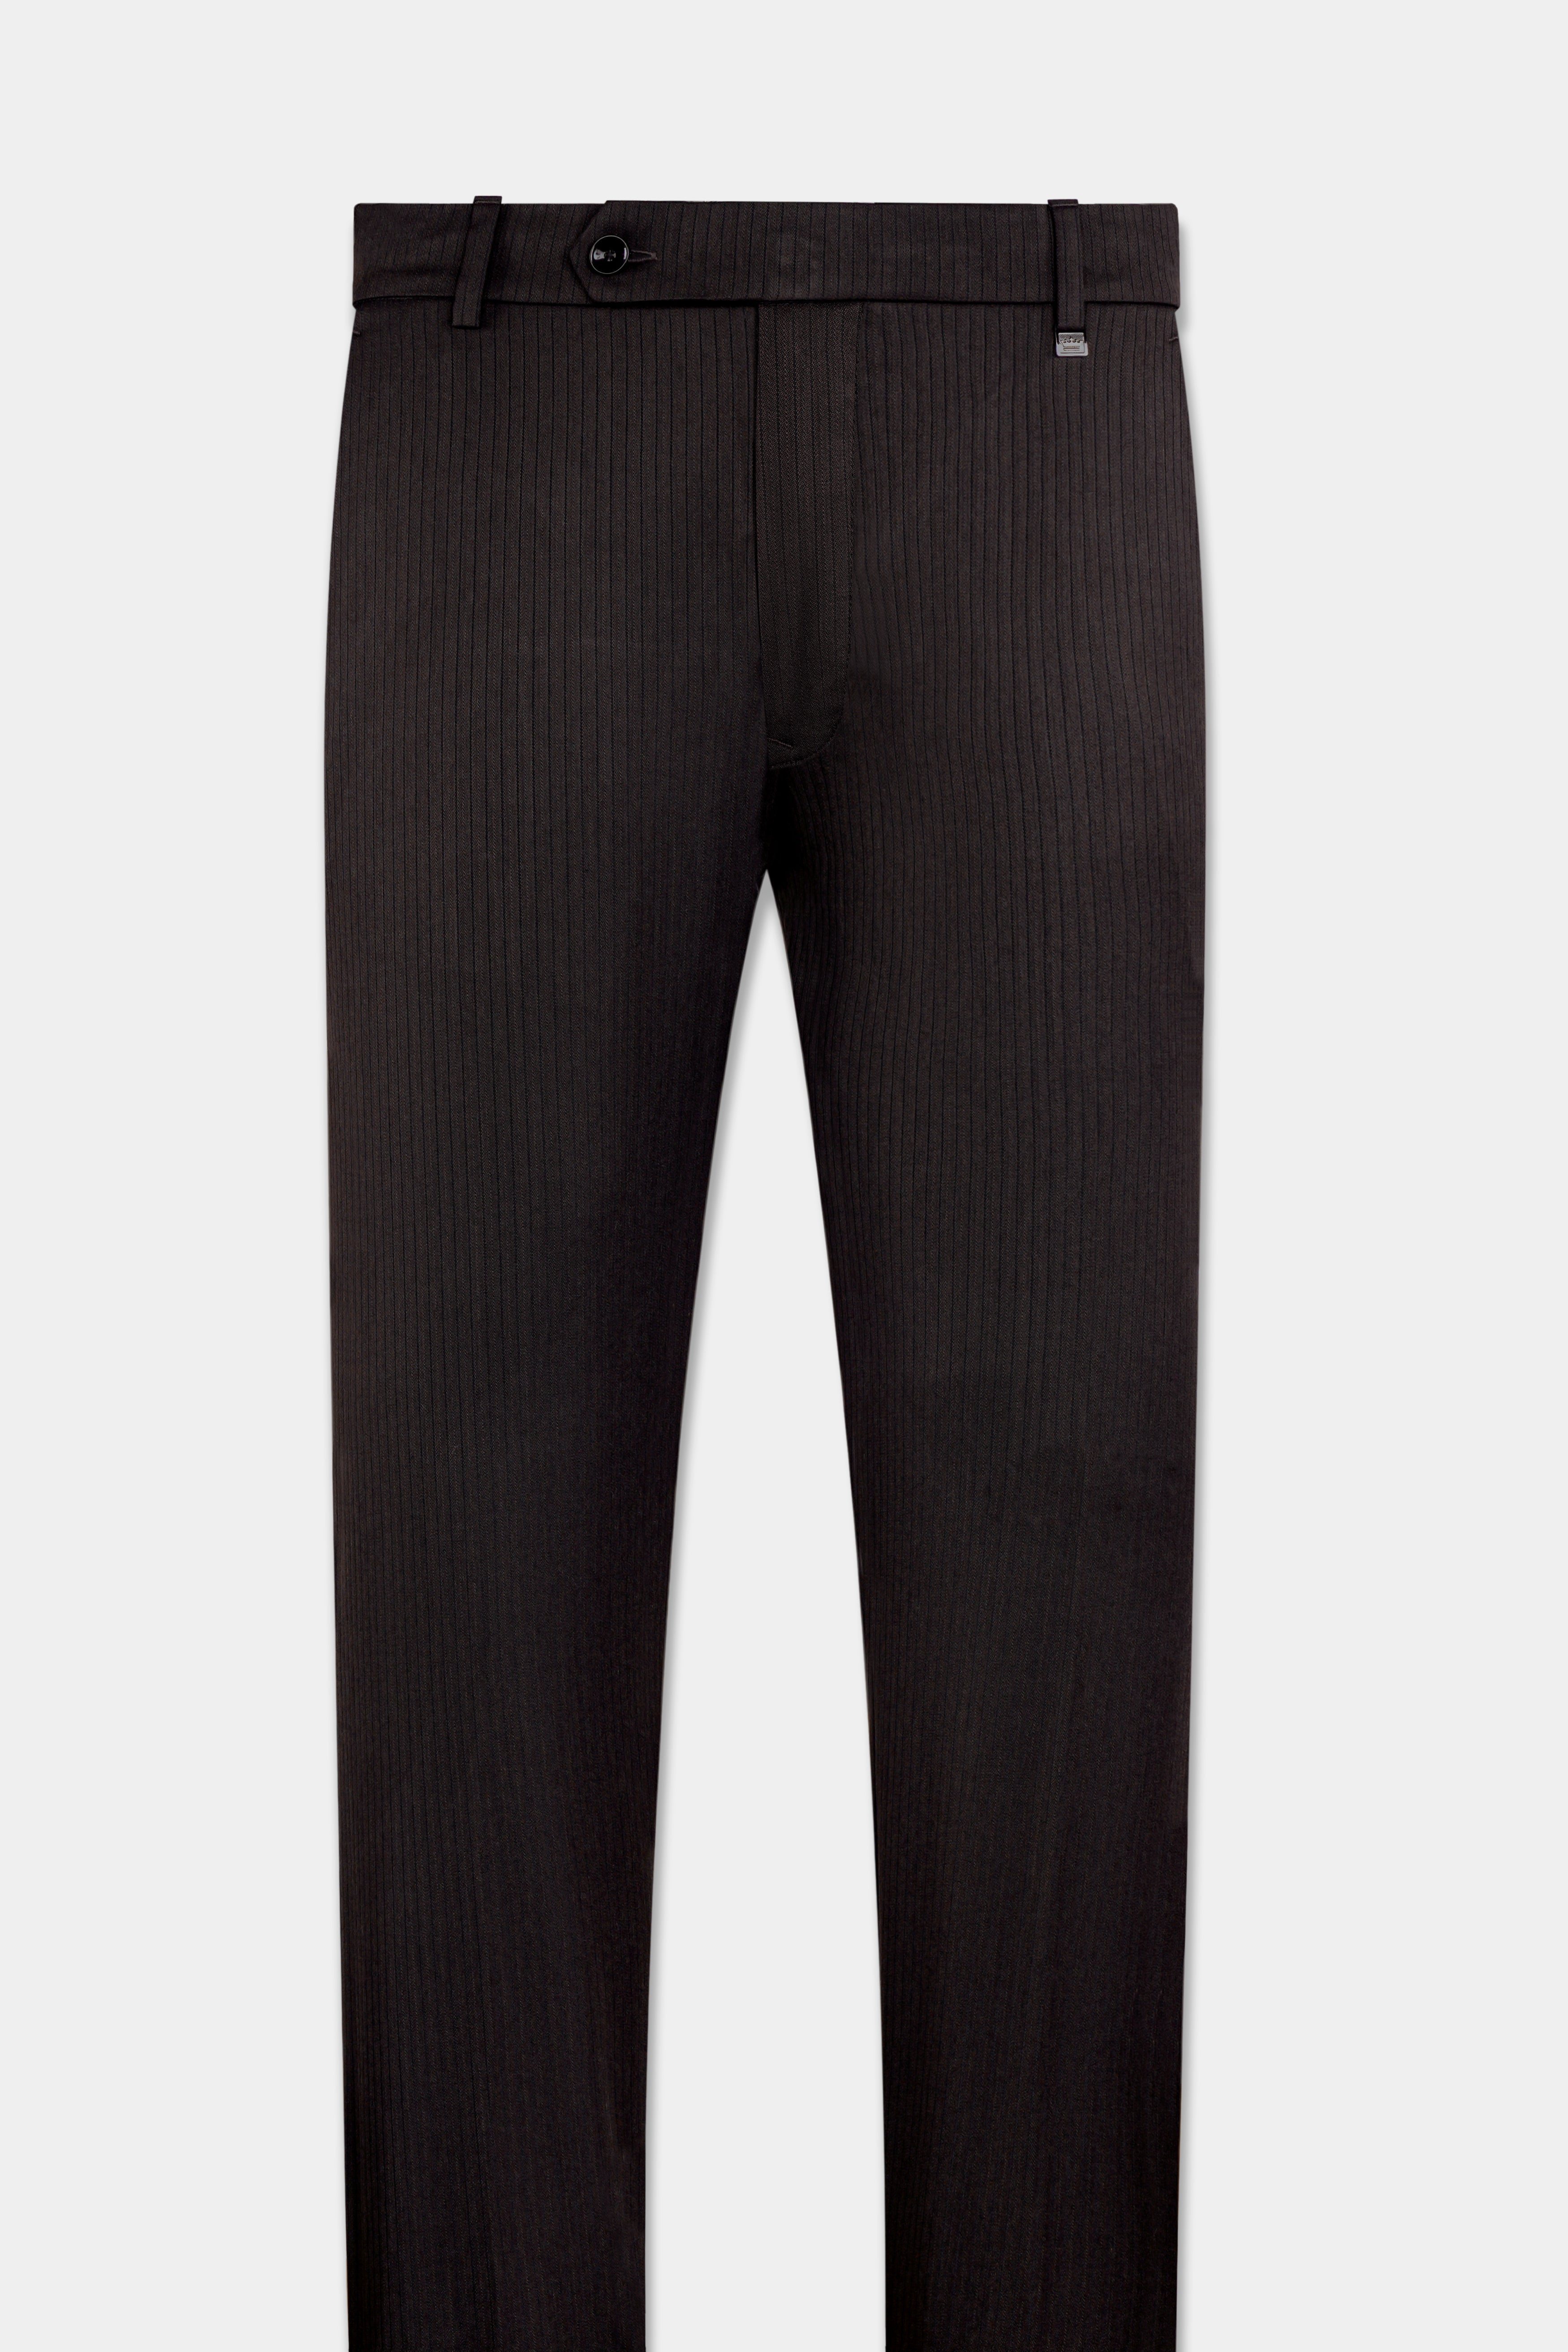 Buy Black Popcorn Textured Straight Fit Pant - Tistabene